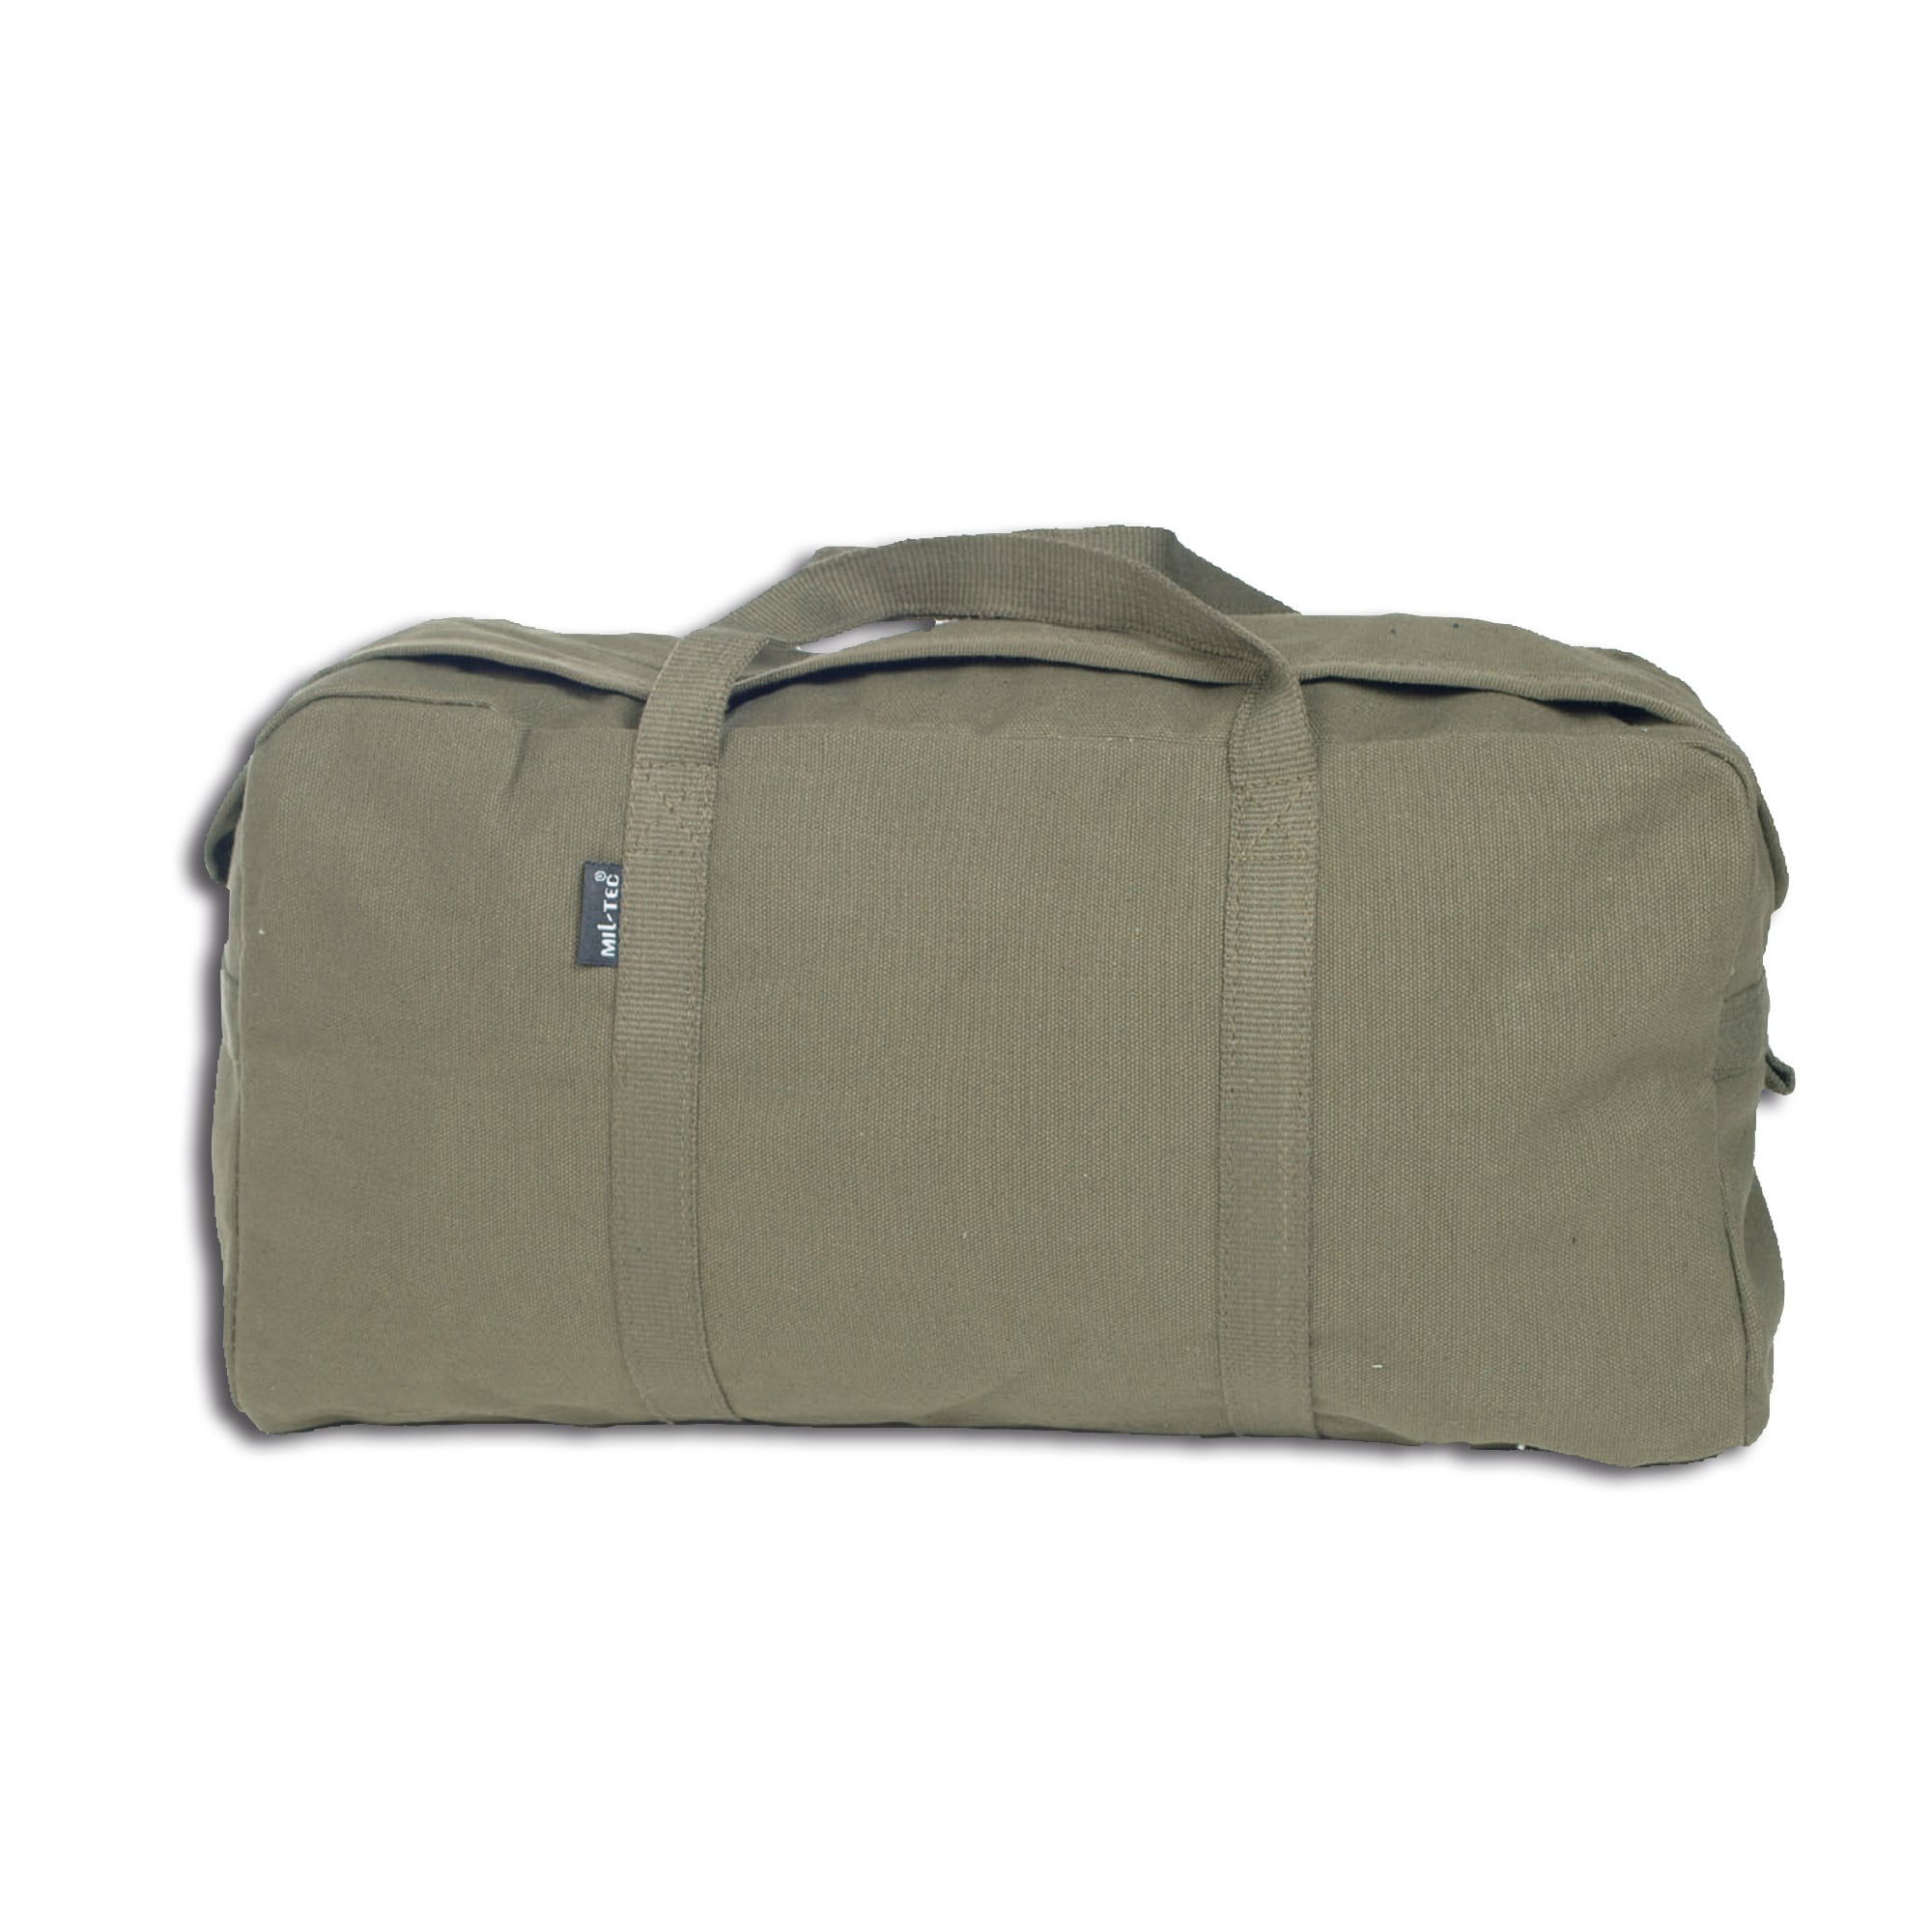 Purchase the Canvas Carrying Bag Medium olive green by ASMC